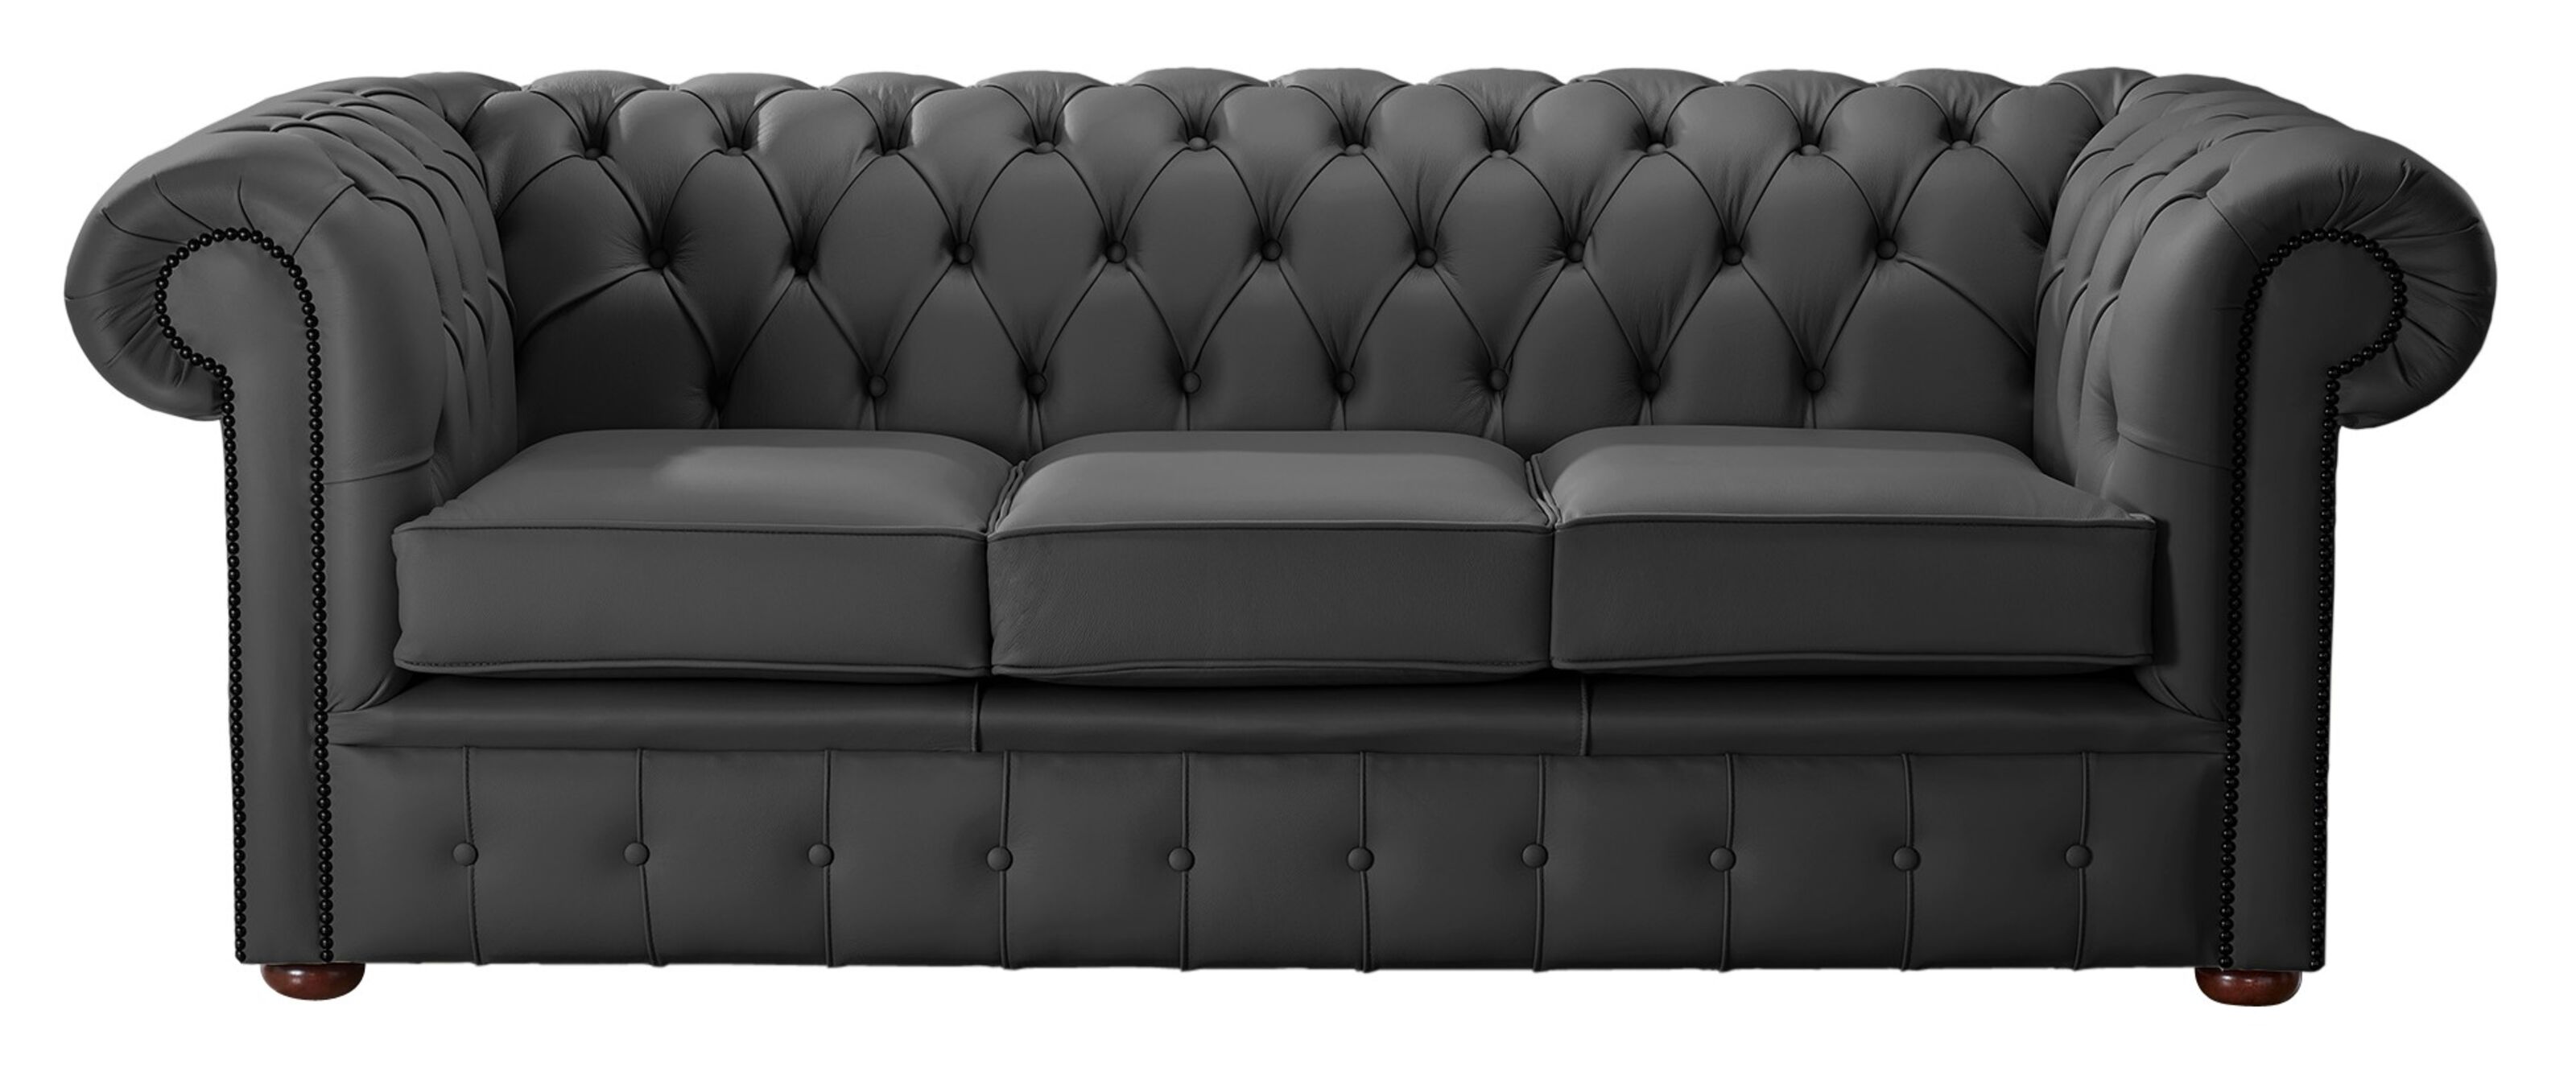 Classic Comfort The Chesterfield Sofa in Pakistani Homes  %Post Title